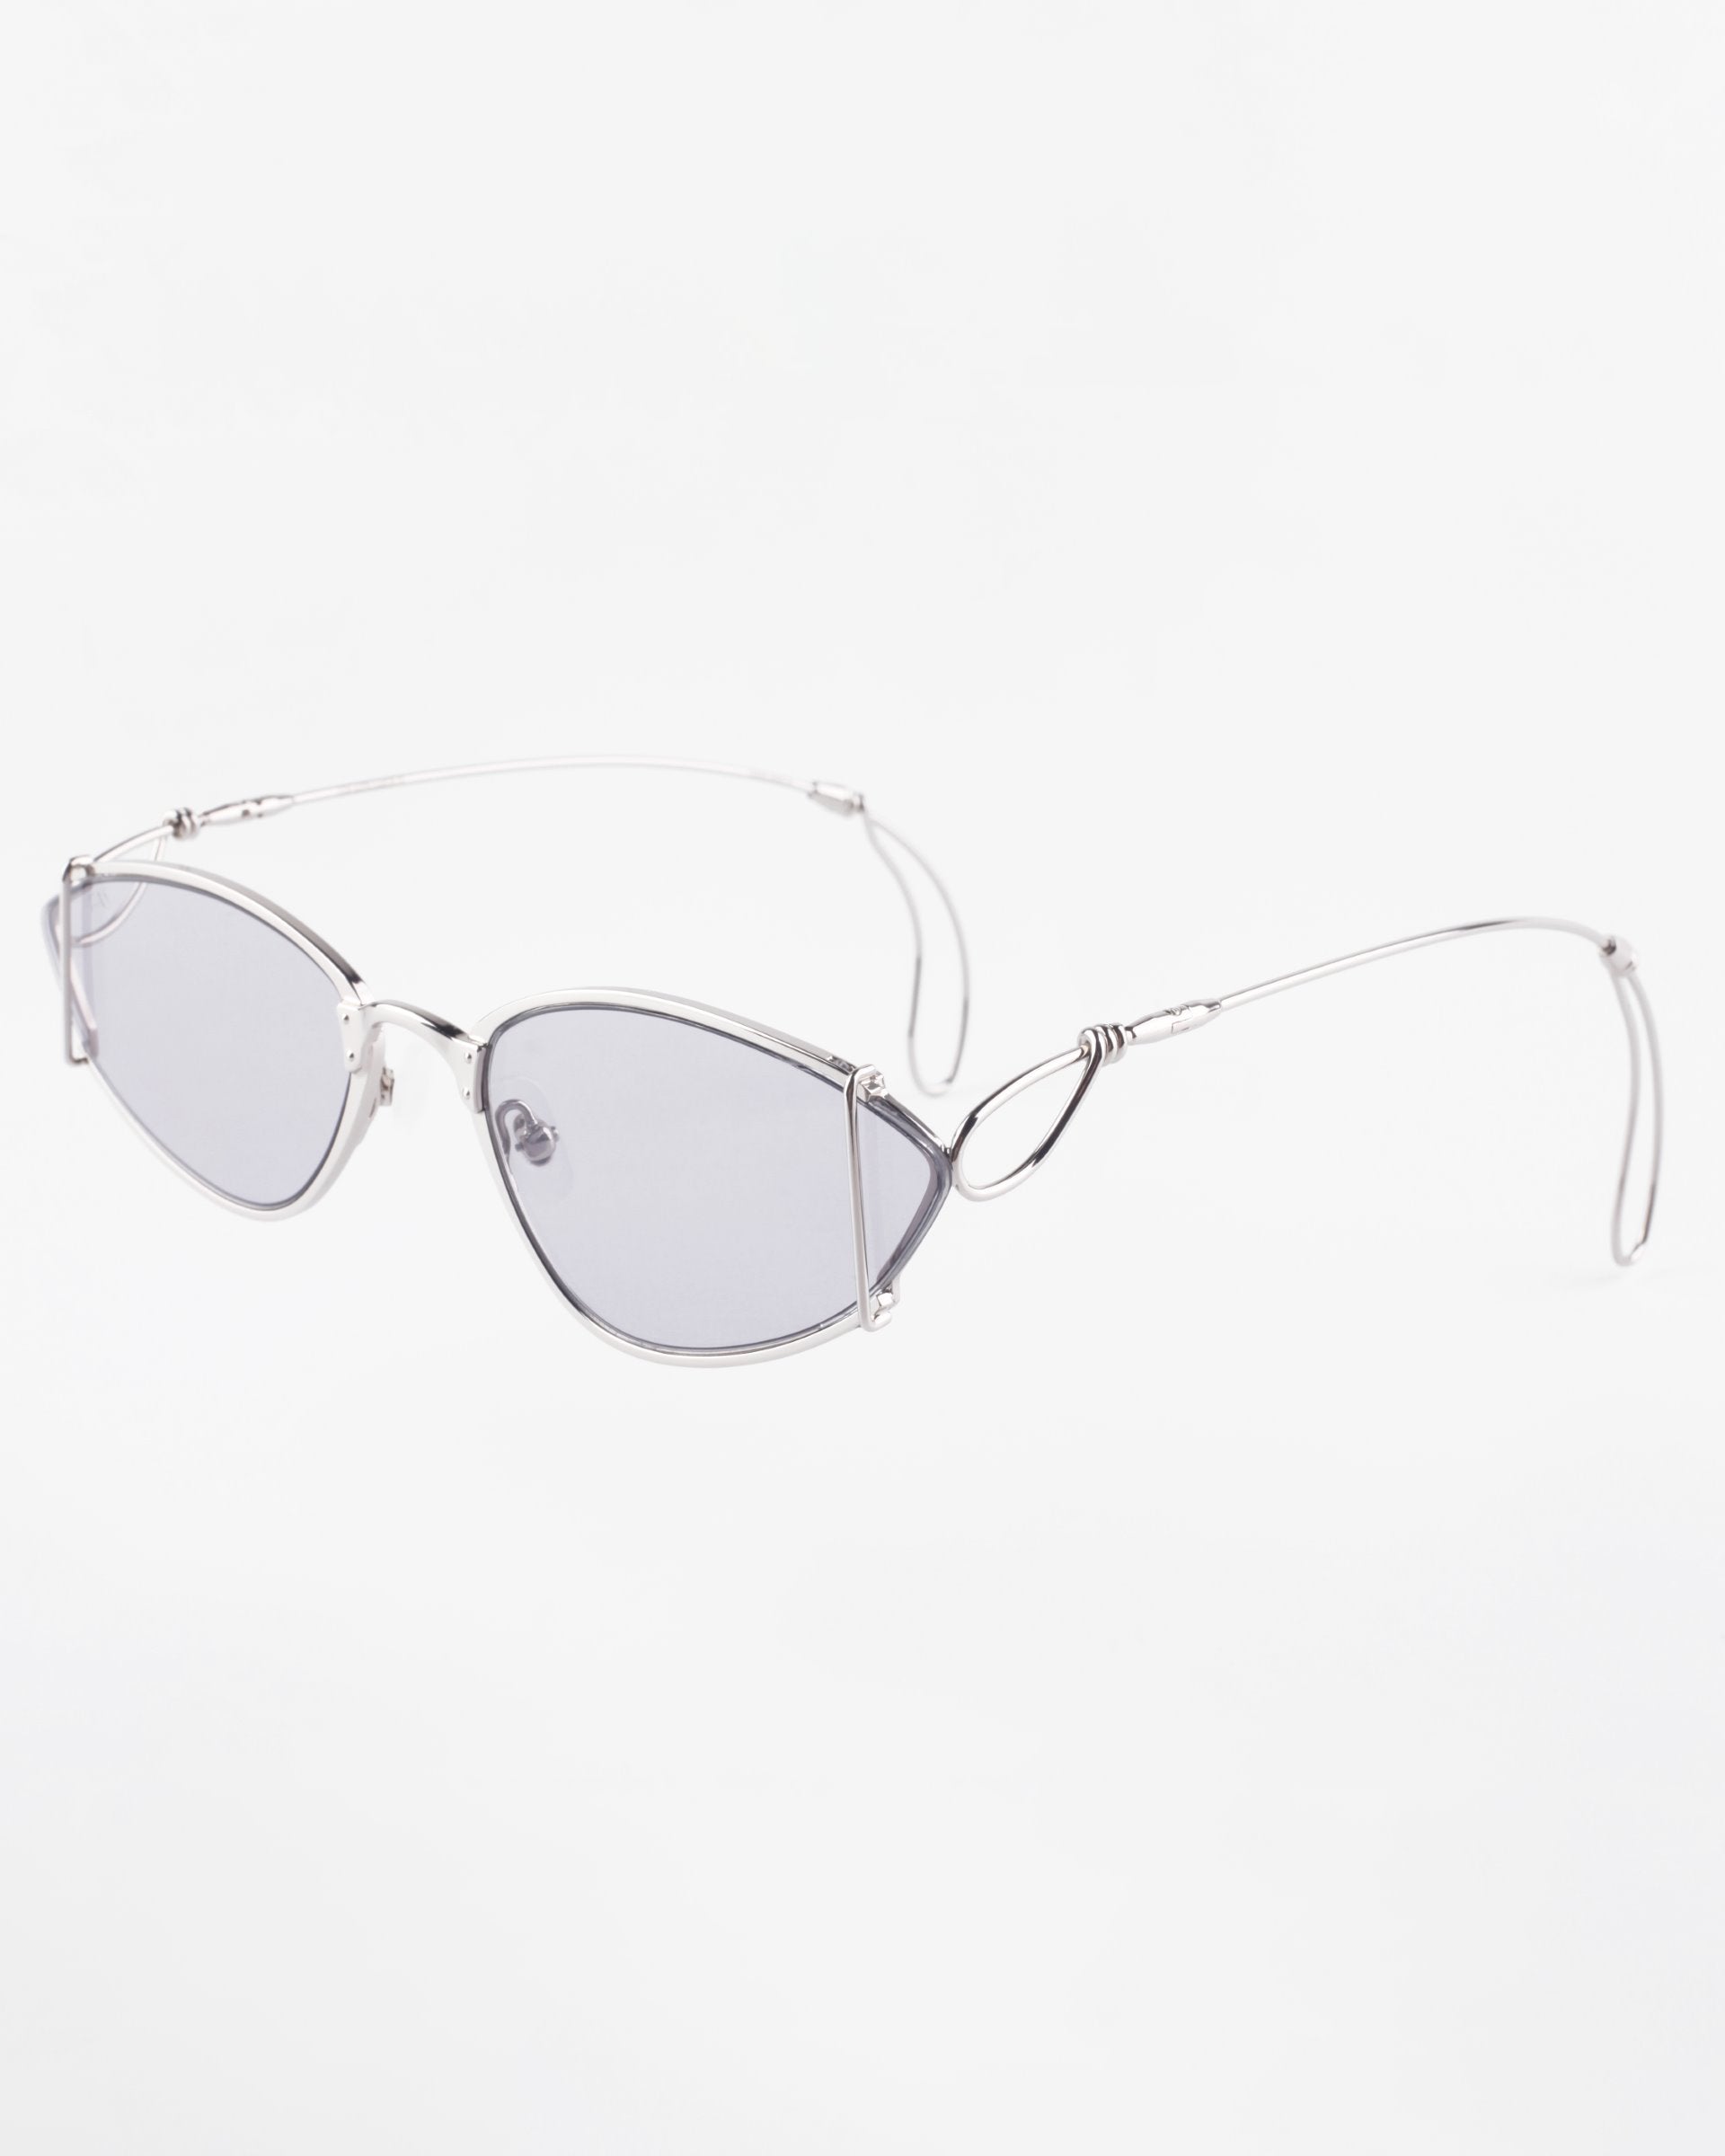 A pair of stylish, slim-framed glasses with silver wire frames and lightly tinted rectangular lenses. The Ornate glasses from For Art&#39;s Sake® have intricate wire detailing near the hinges and thin, flexible temple arms. Featuring ultra-lightweight Nylon lenses with 100% UVA &amp; UVB protection, the background is plain white.